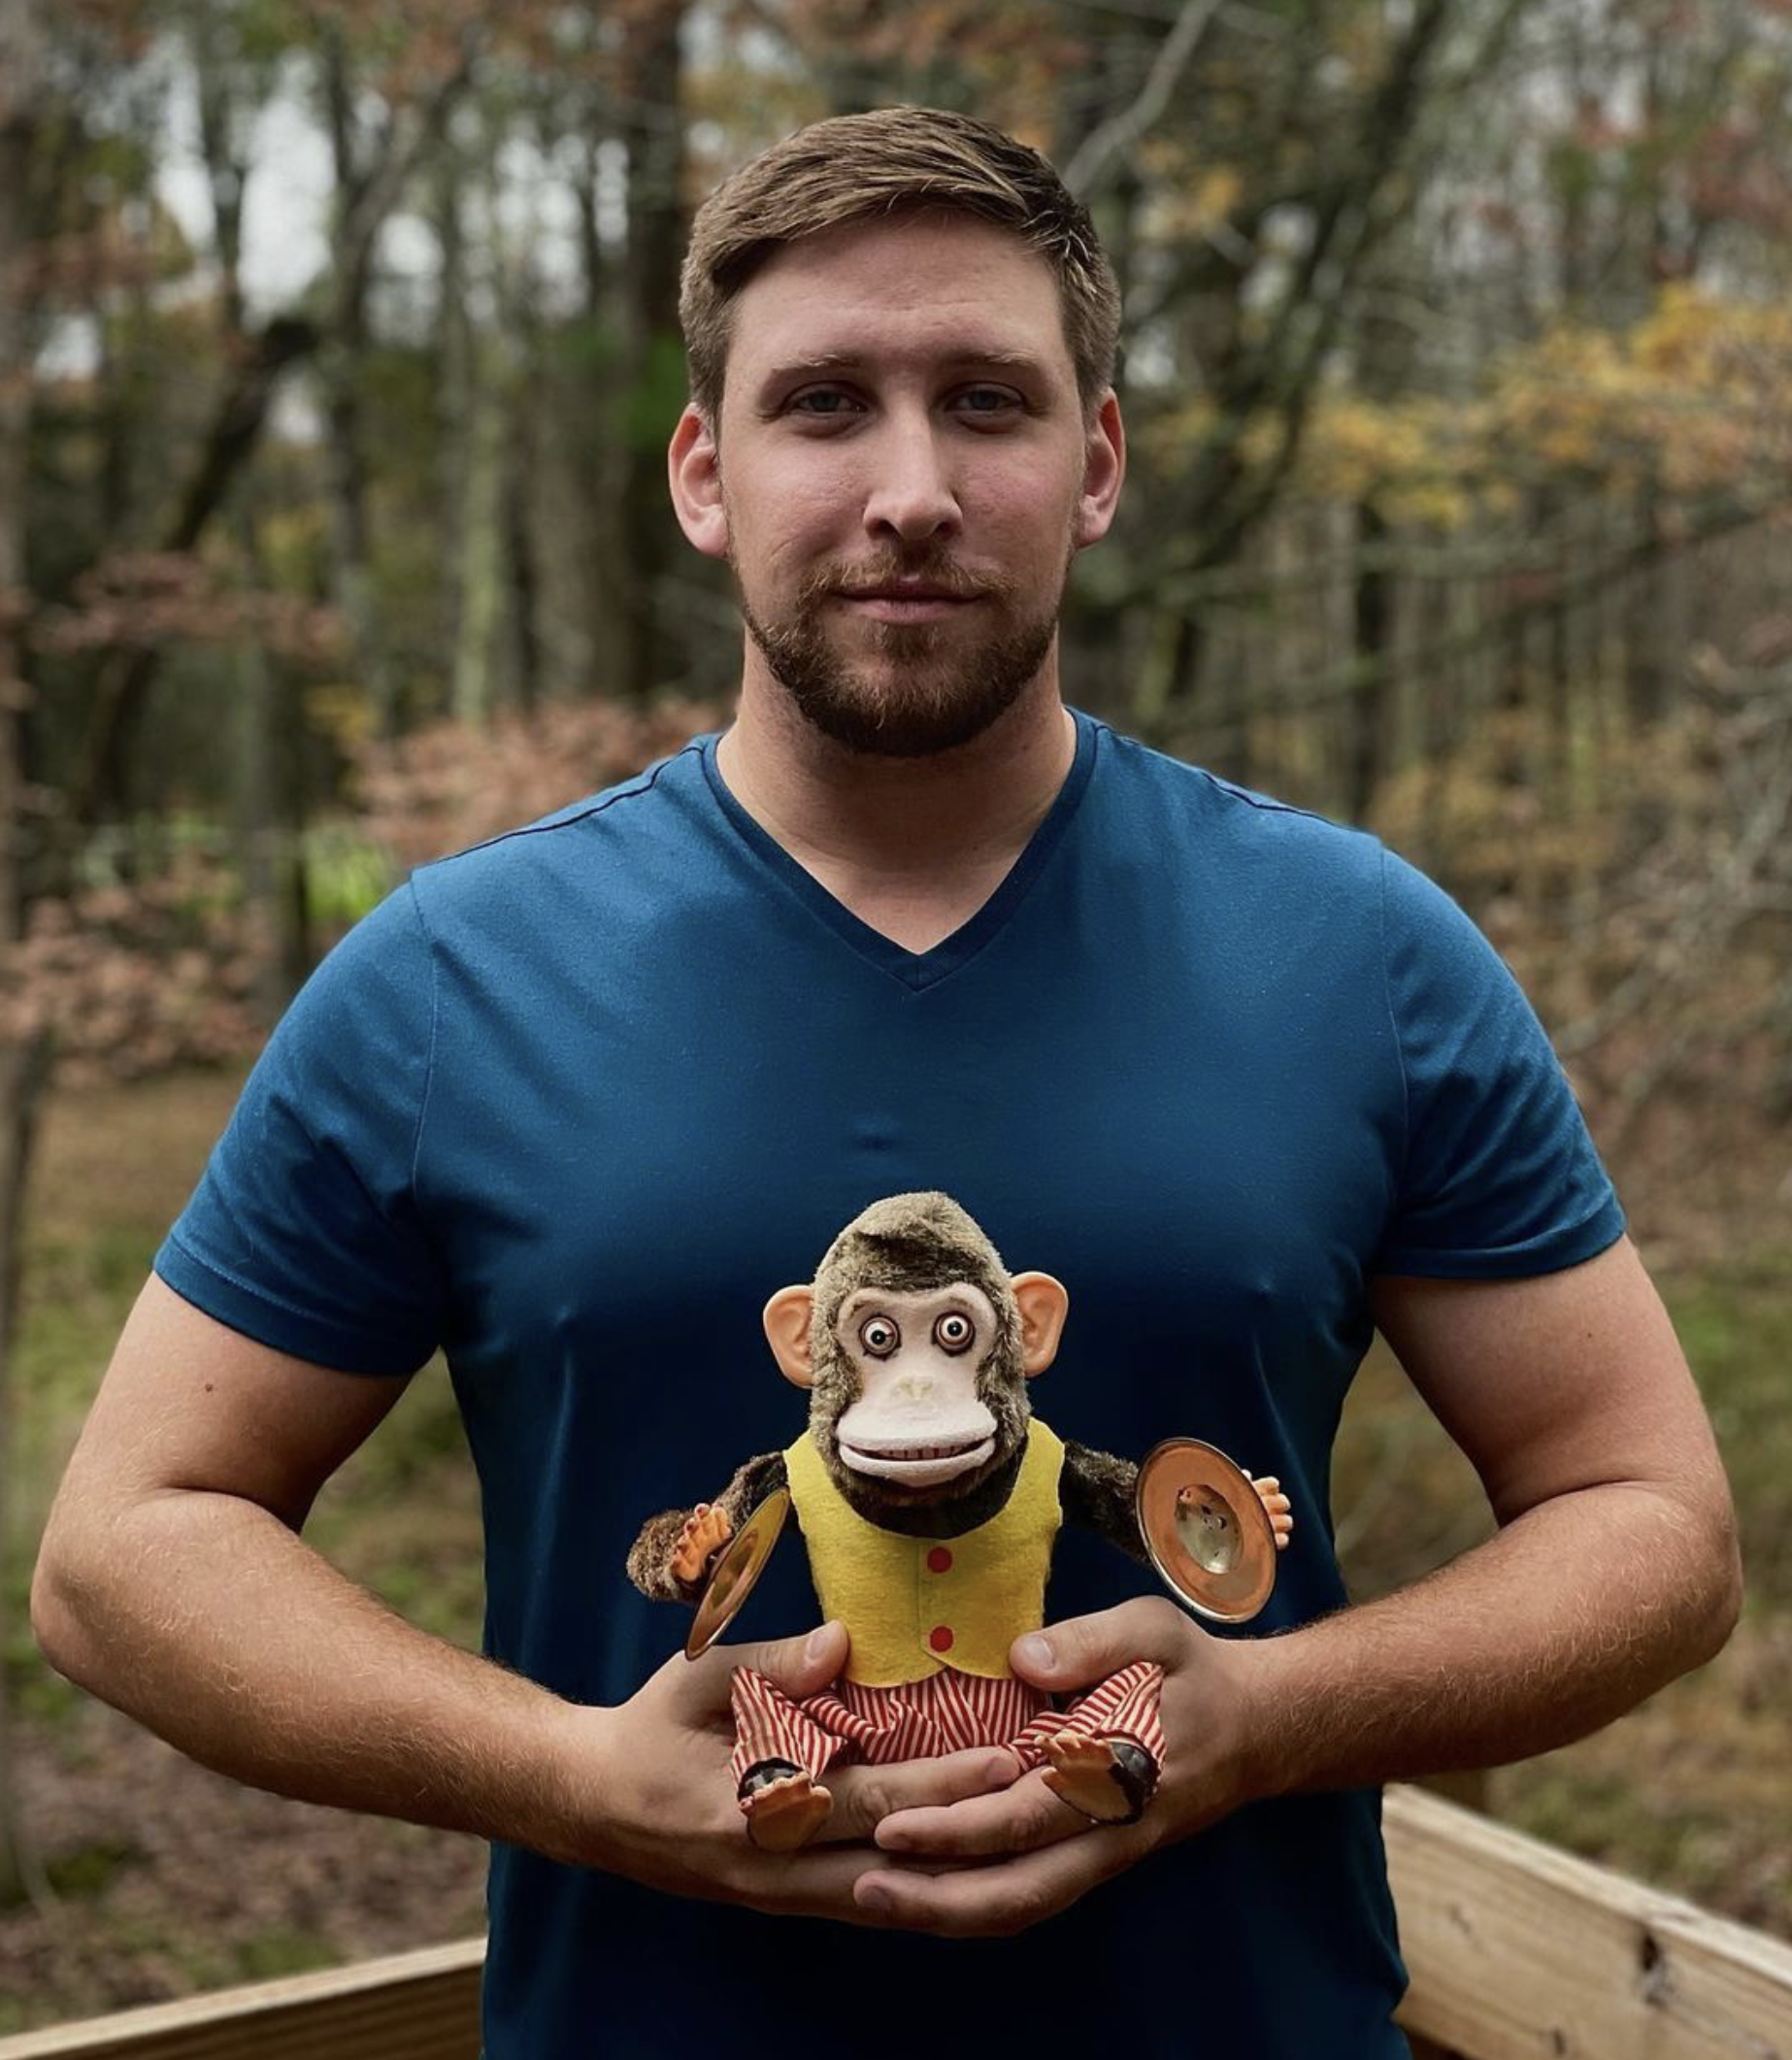 Saratoga filmmaker set to debut THE MONKEY Short Film this weekend in Saratoga Springs